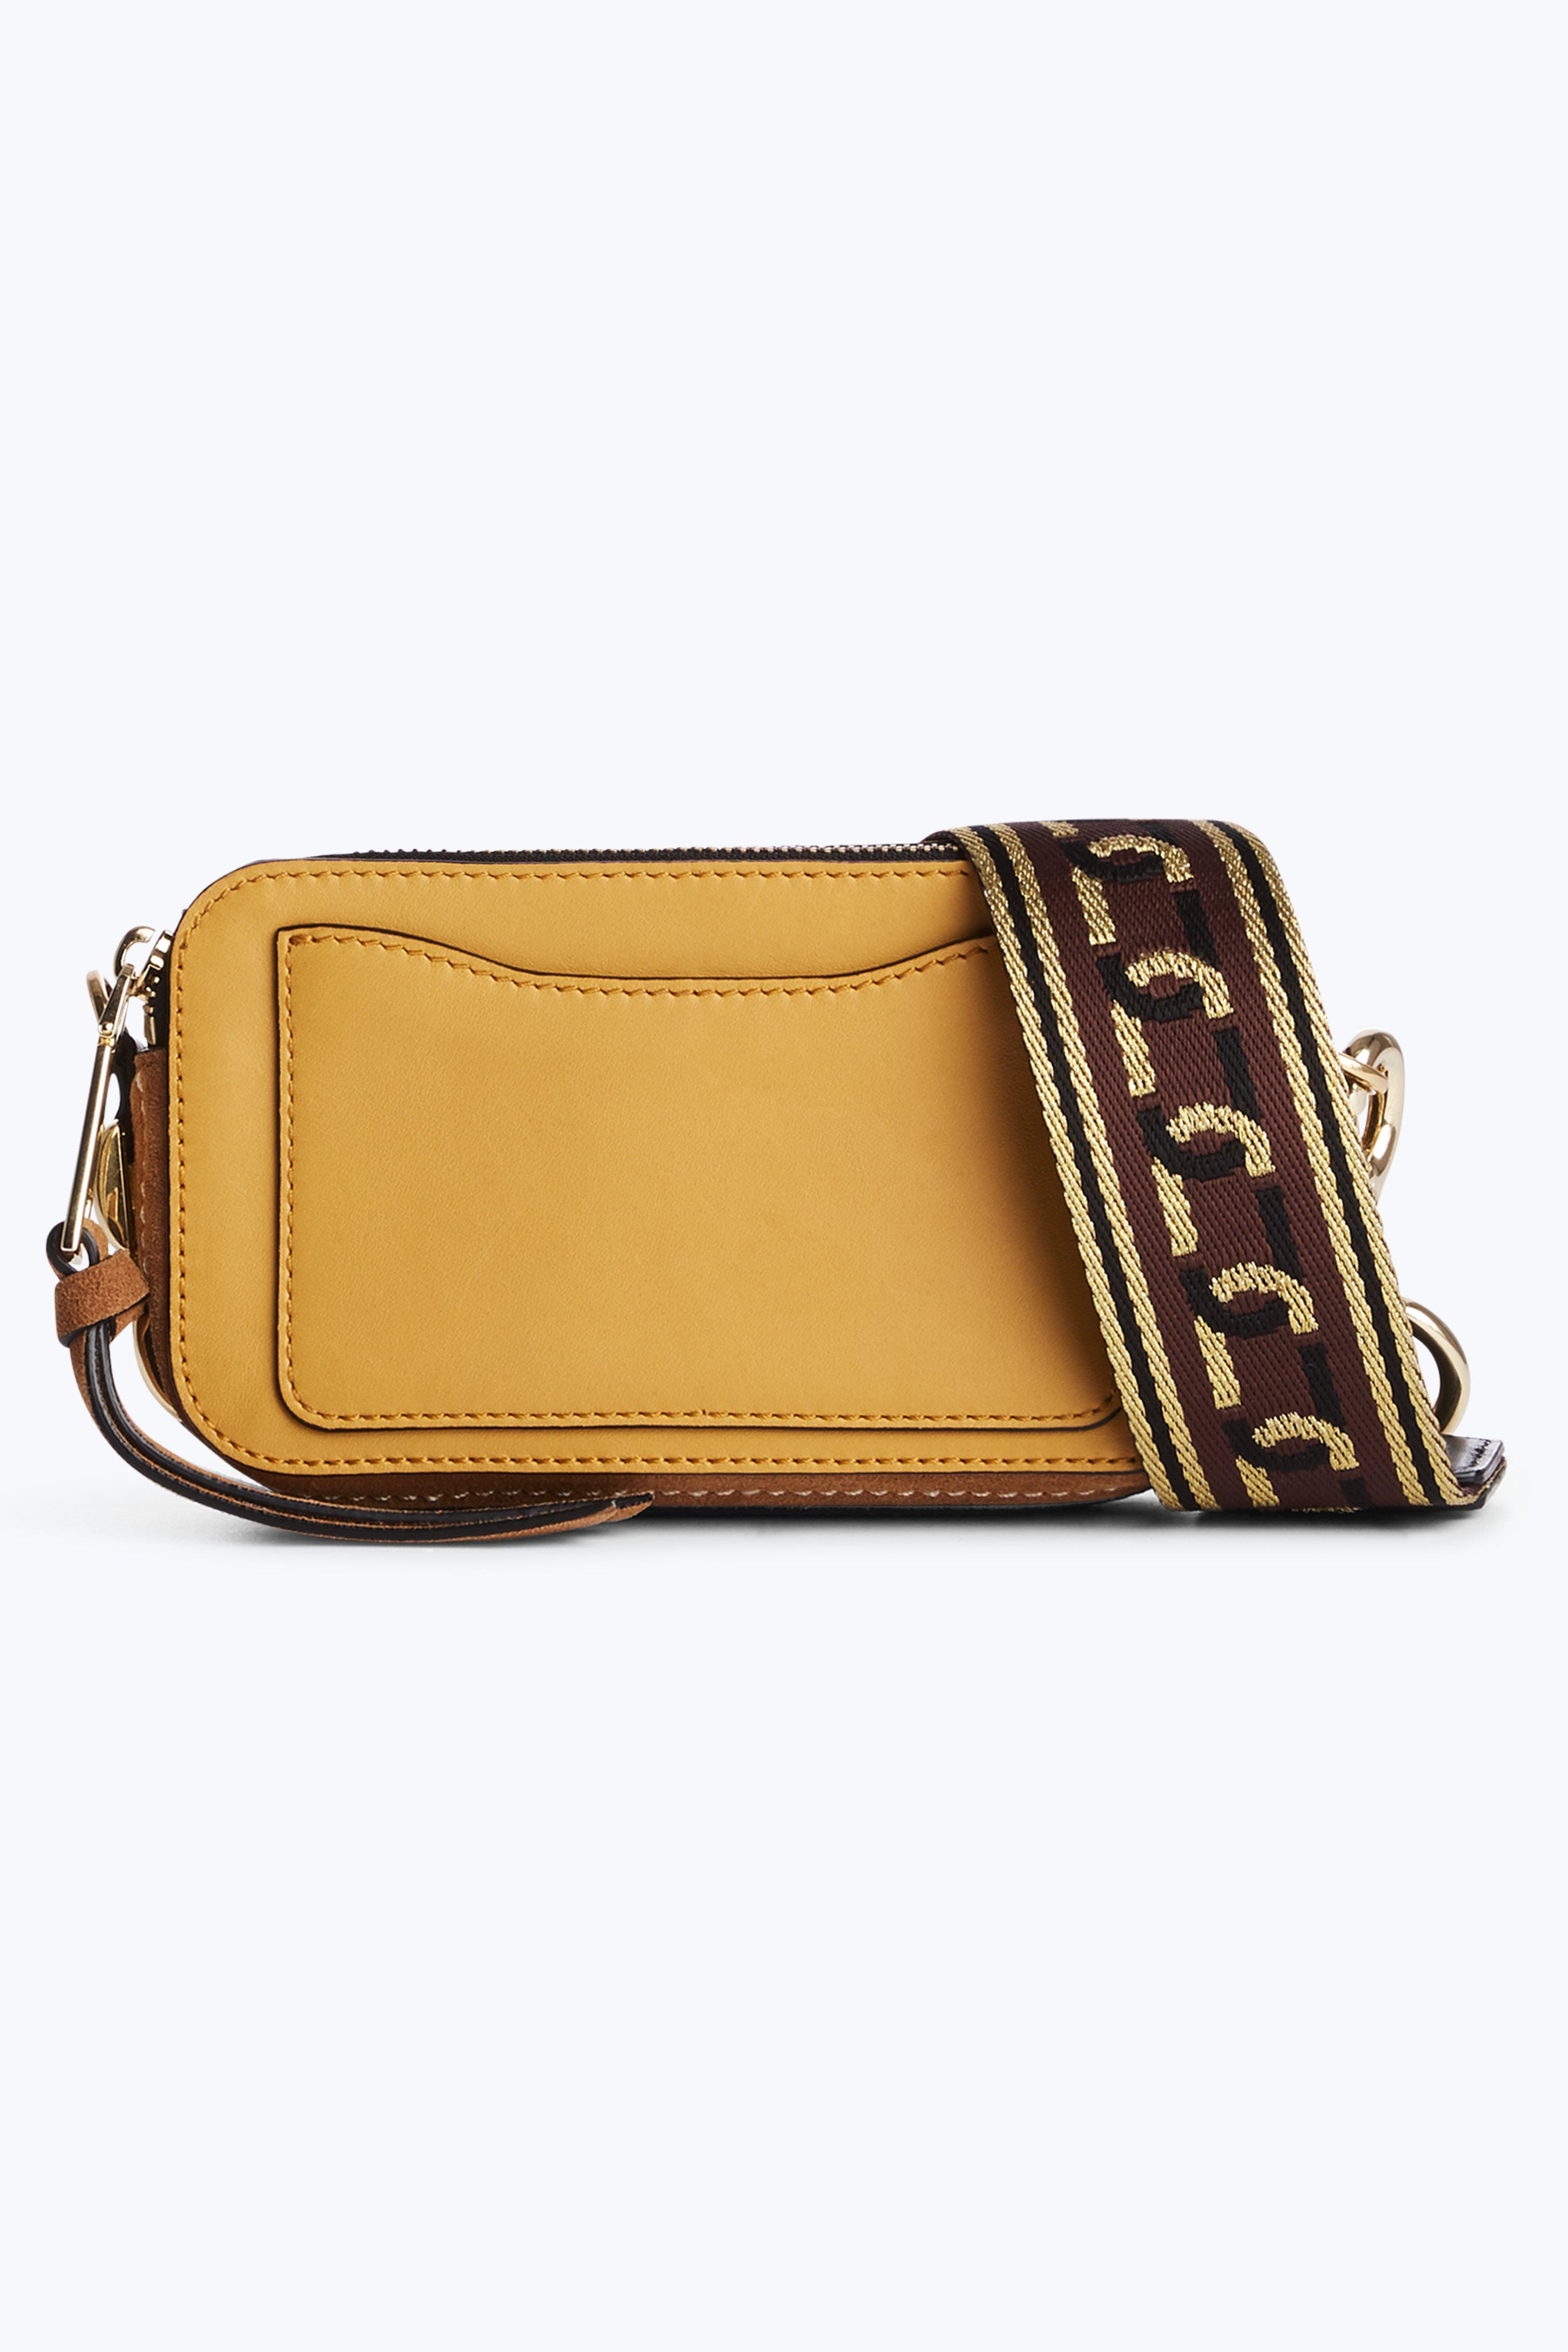 MARC JACOBS Small Chain Snapshot Suede Camera Bag - Yellow in Mustard | ModeSens